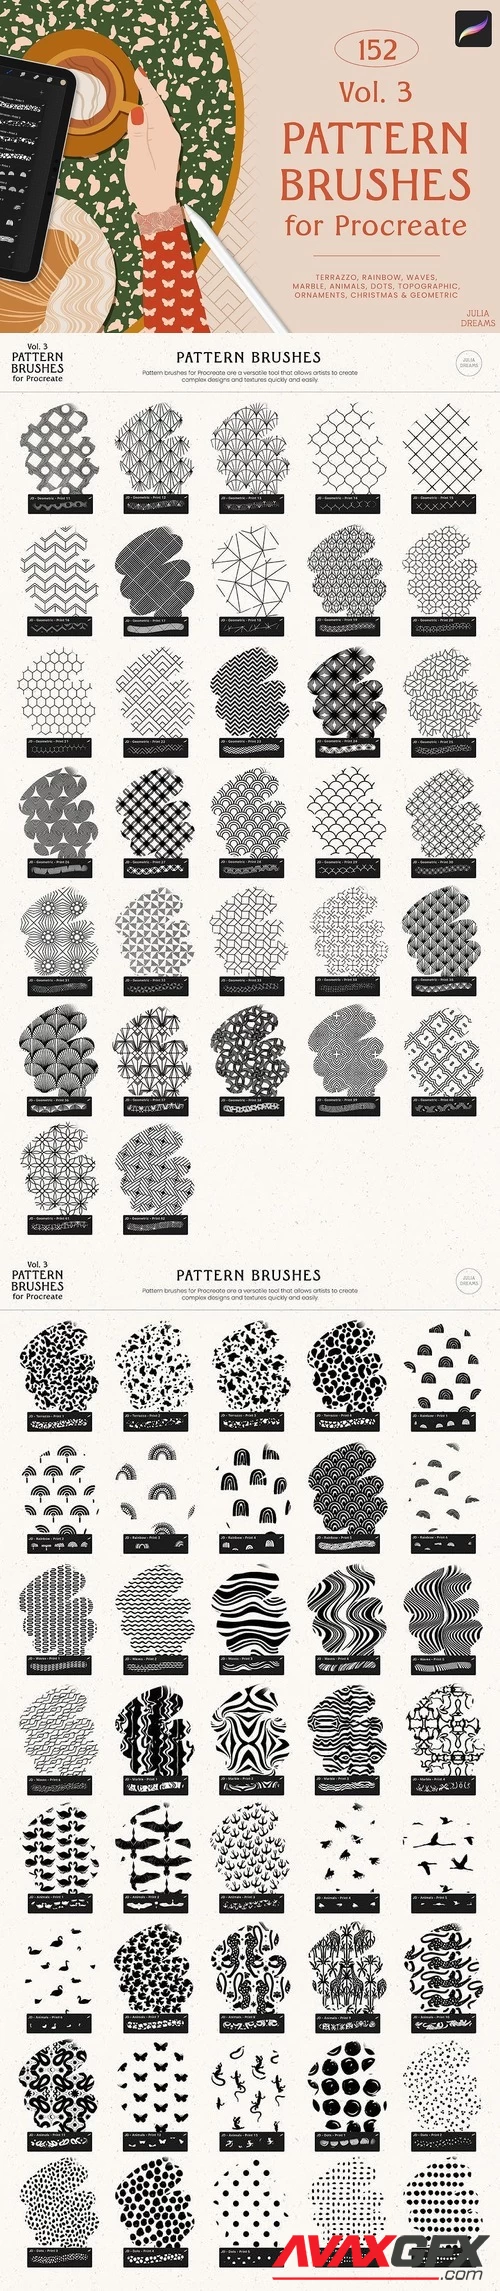 Pattern Brushes for Procreate Vol 3